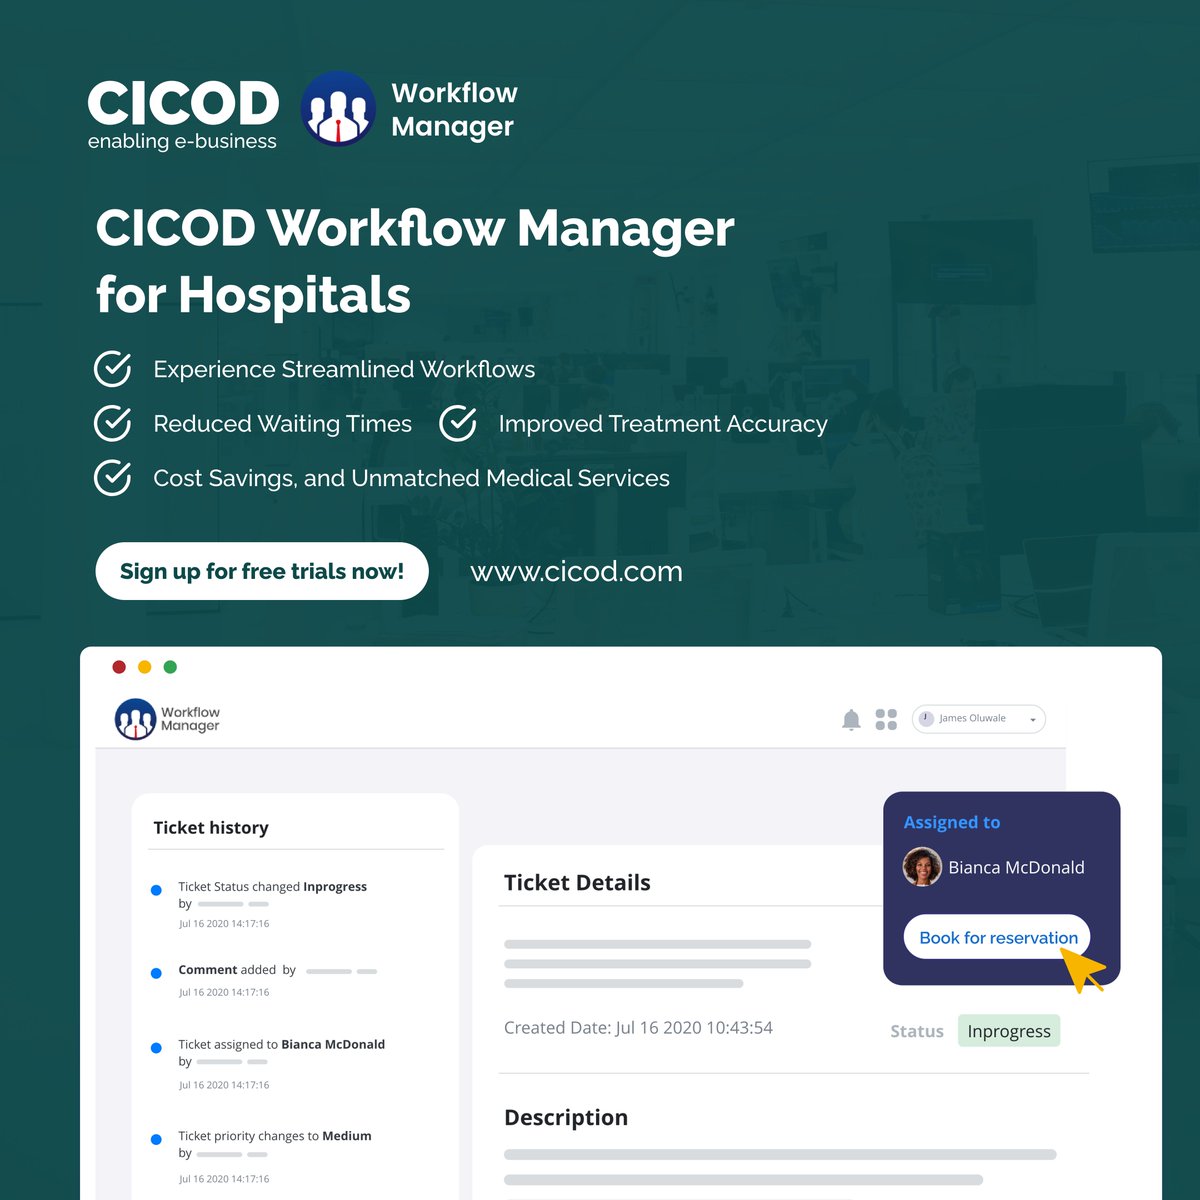 Streamline hospital operations with CICOD's Workflow Manager! 🏥 

#CICOD #HealthcareEfficiency #HospitalAutomation  #MedicalTechnology #HealthTech #HealthcareInnovation #WorkflowOptimization #HospitalManagement #PatientCare #DigitalTransformation